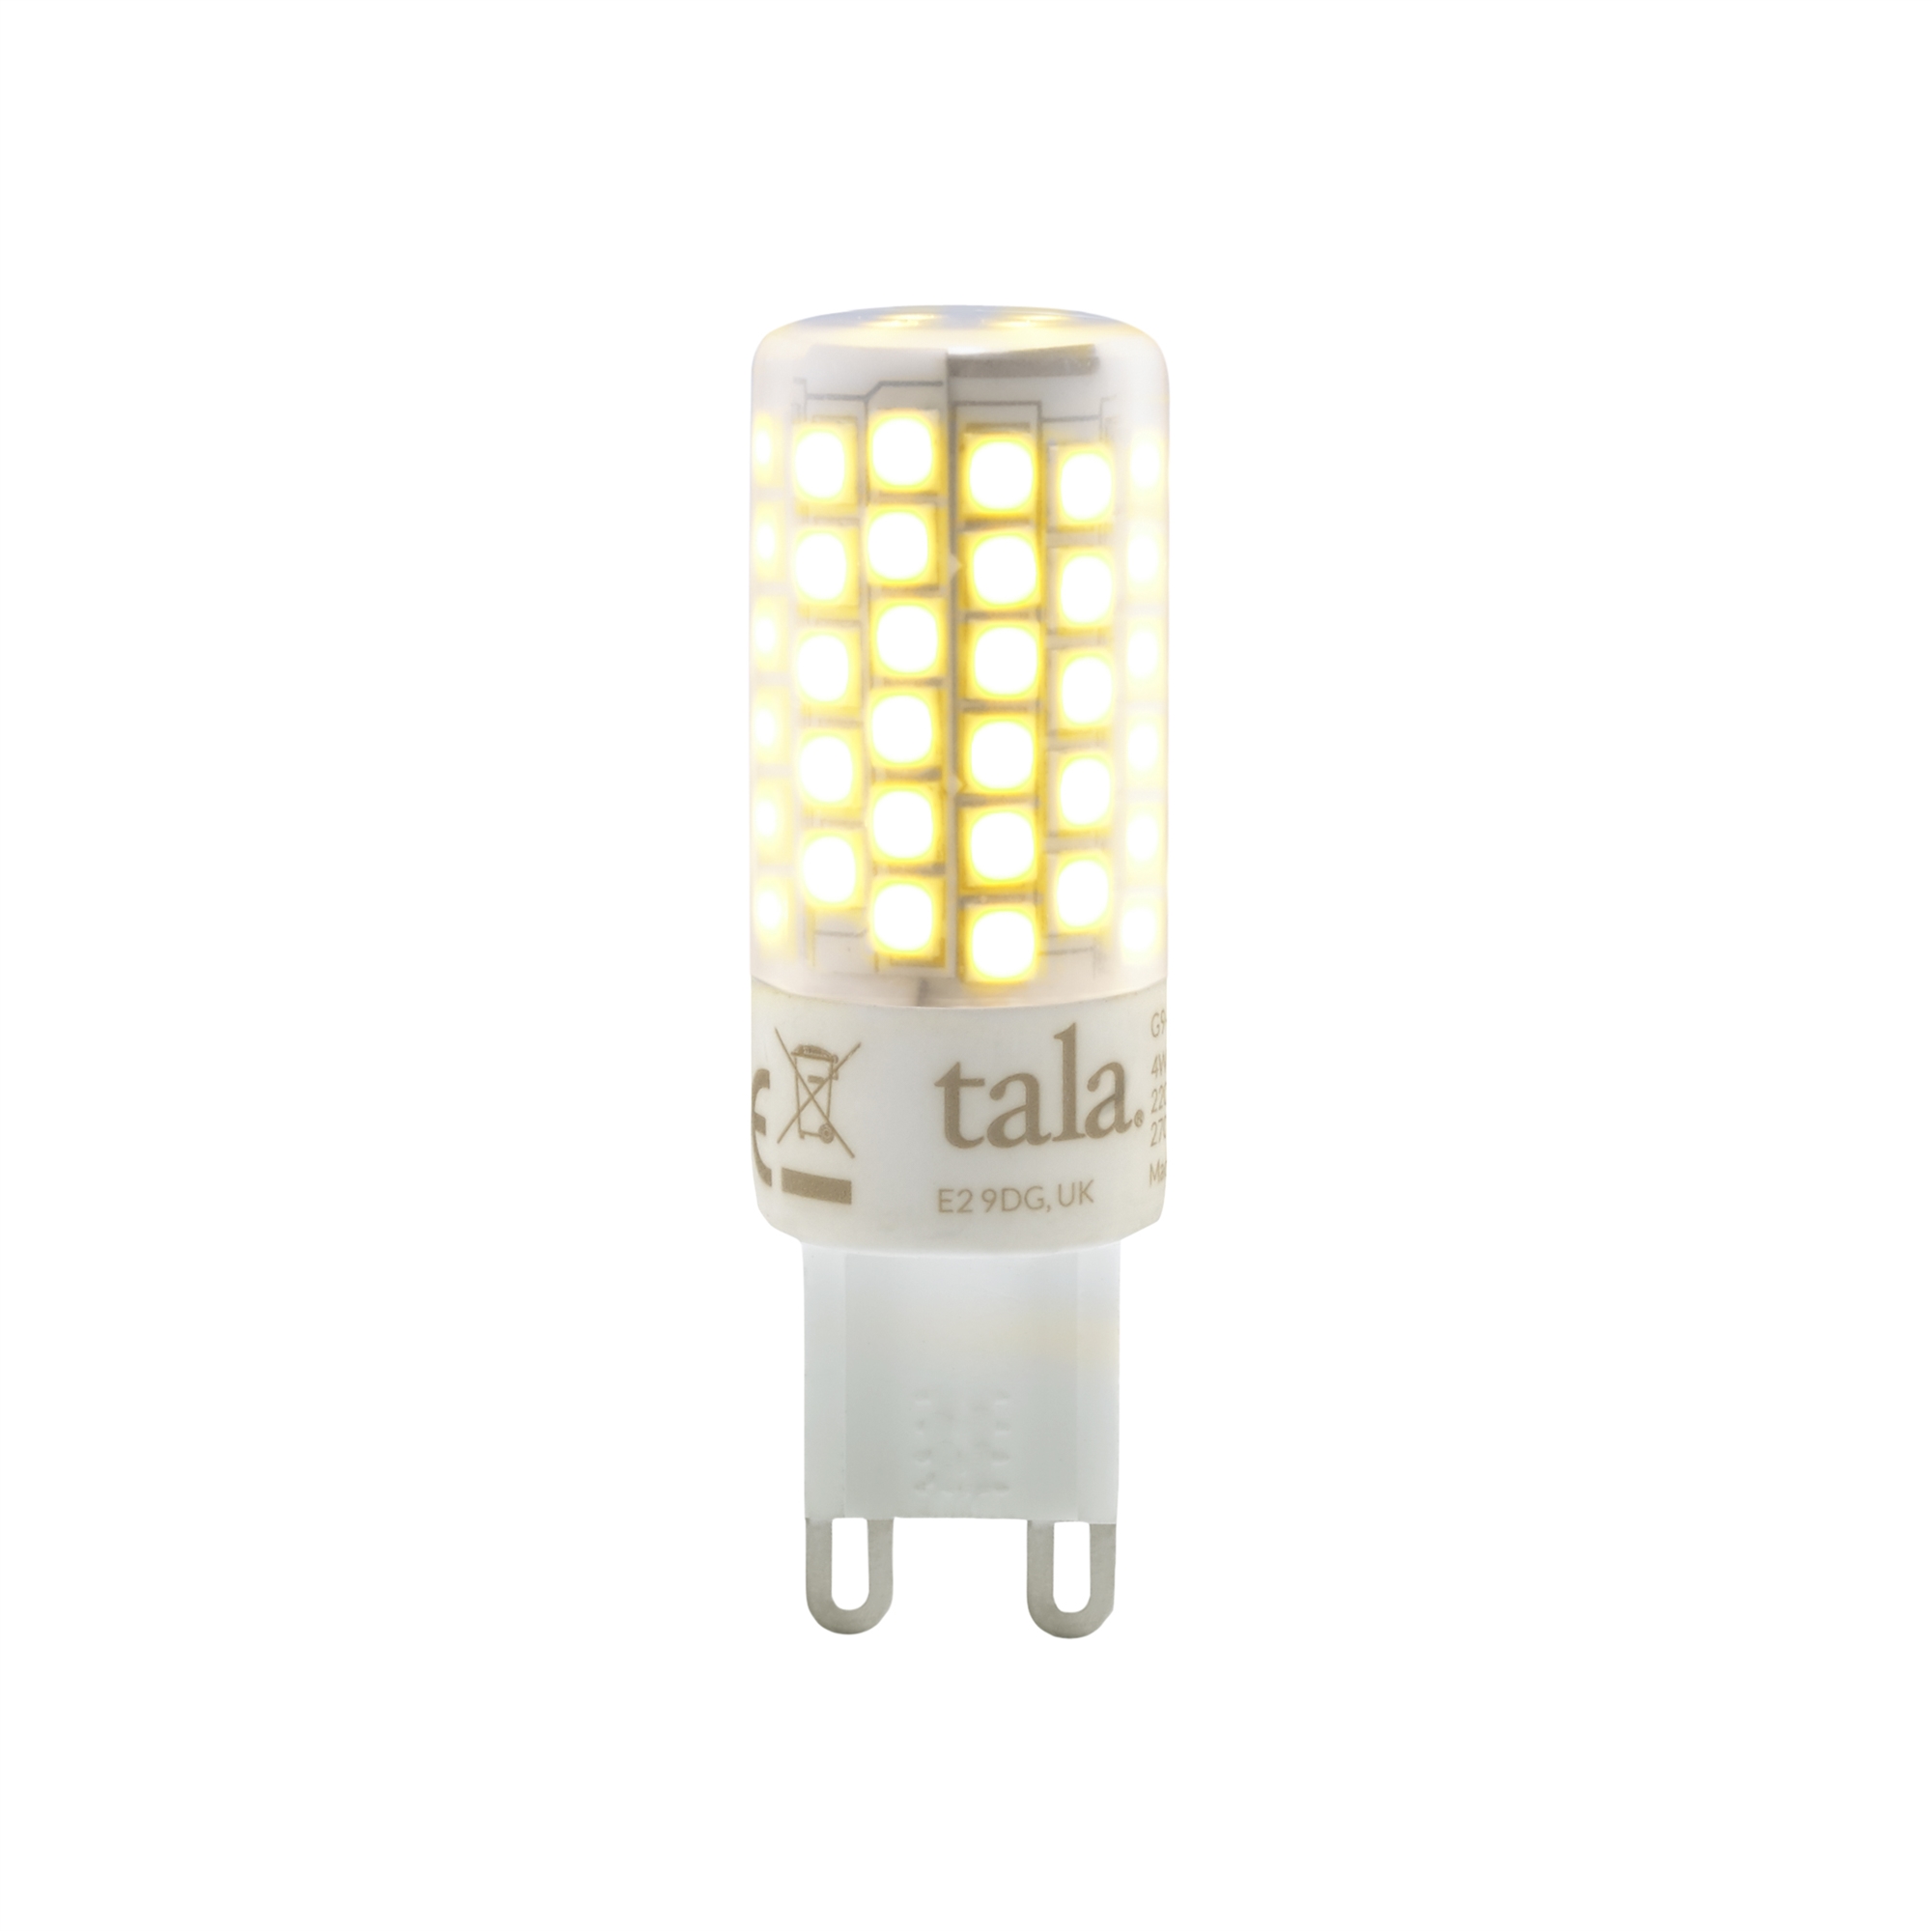 G9 3.6W LED CRI 97 230V Dimmable Frosted Cover CE